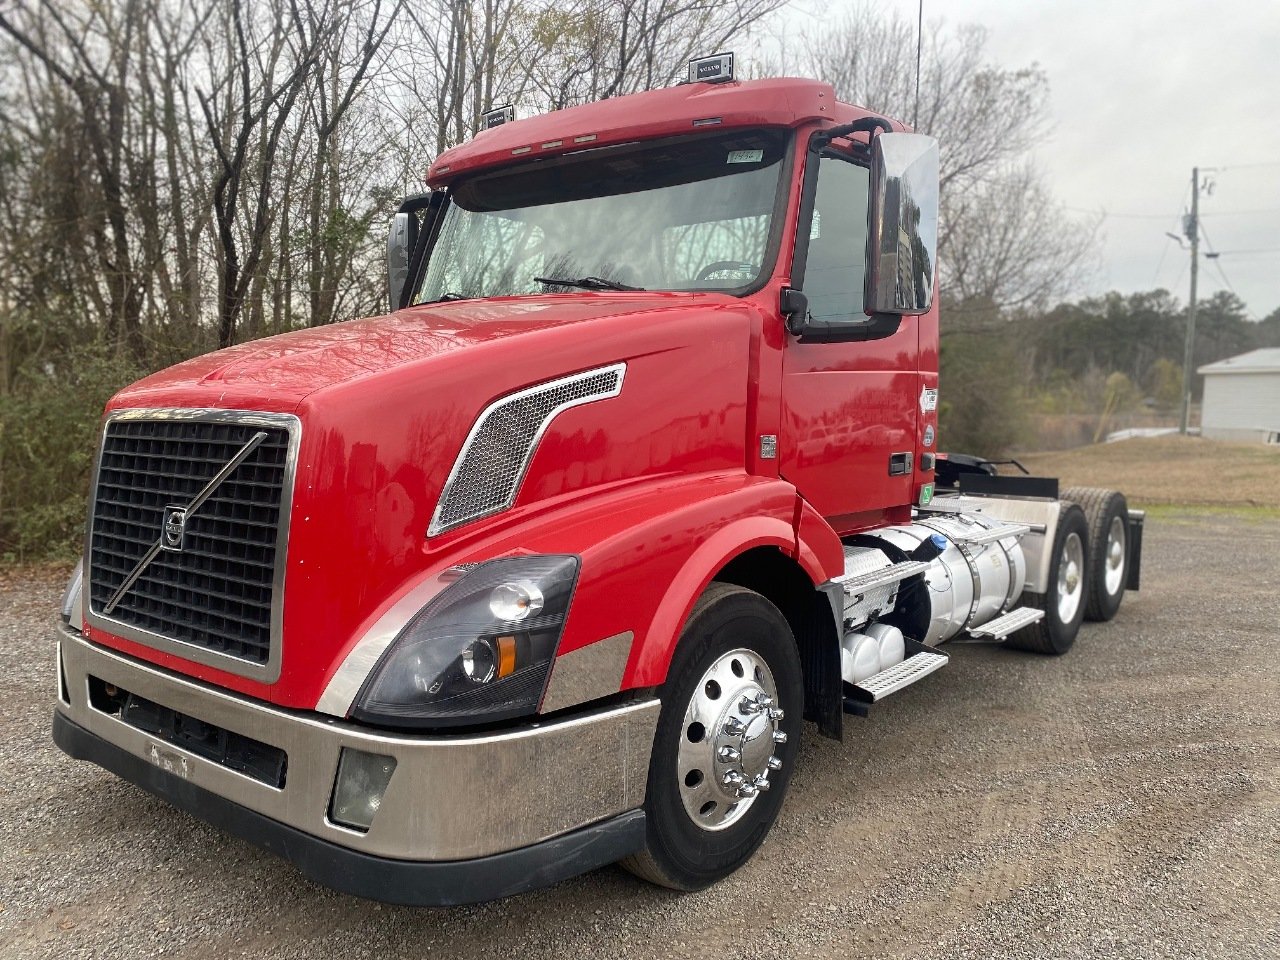 USED 2017 VOLVO VNL64T300 TANDEM AXLE DAYCAB TRUCK #15204